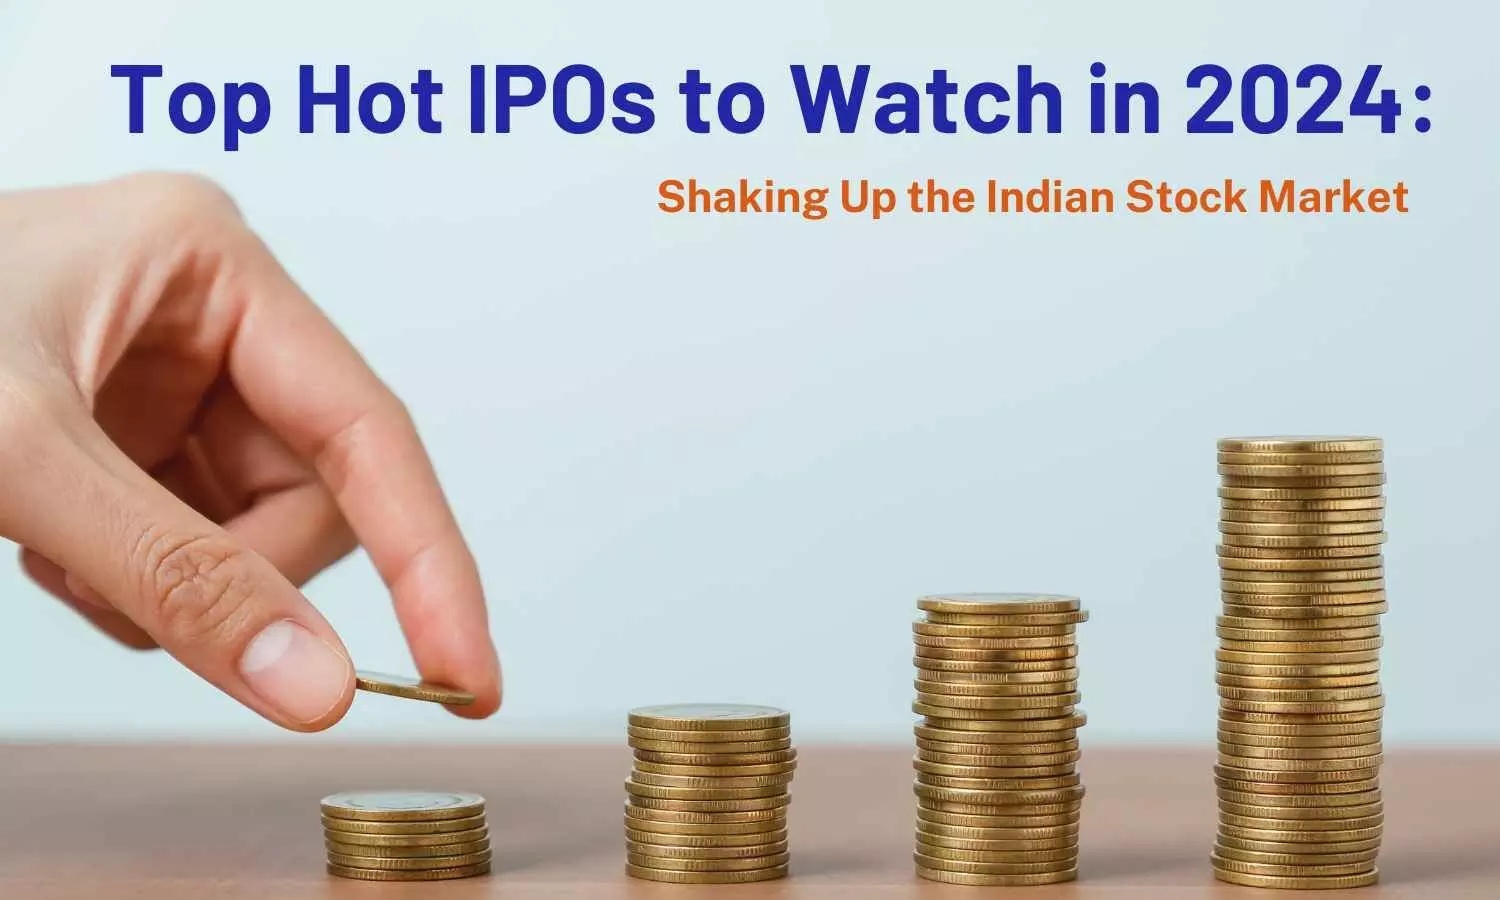 Top Hot IPOs to Watch in 2024: Shaking Up the Indian Stock Market